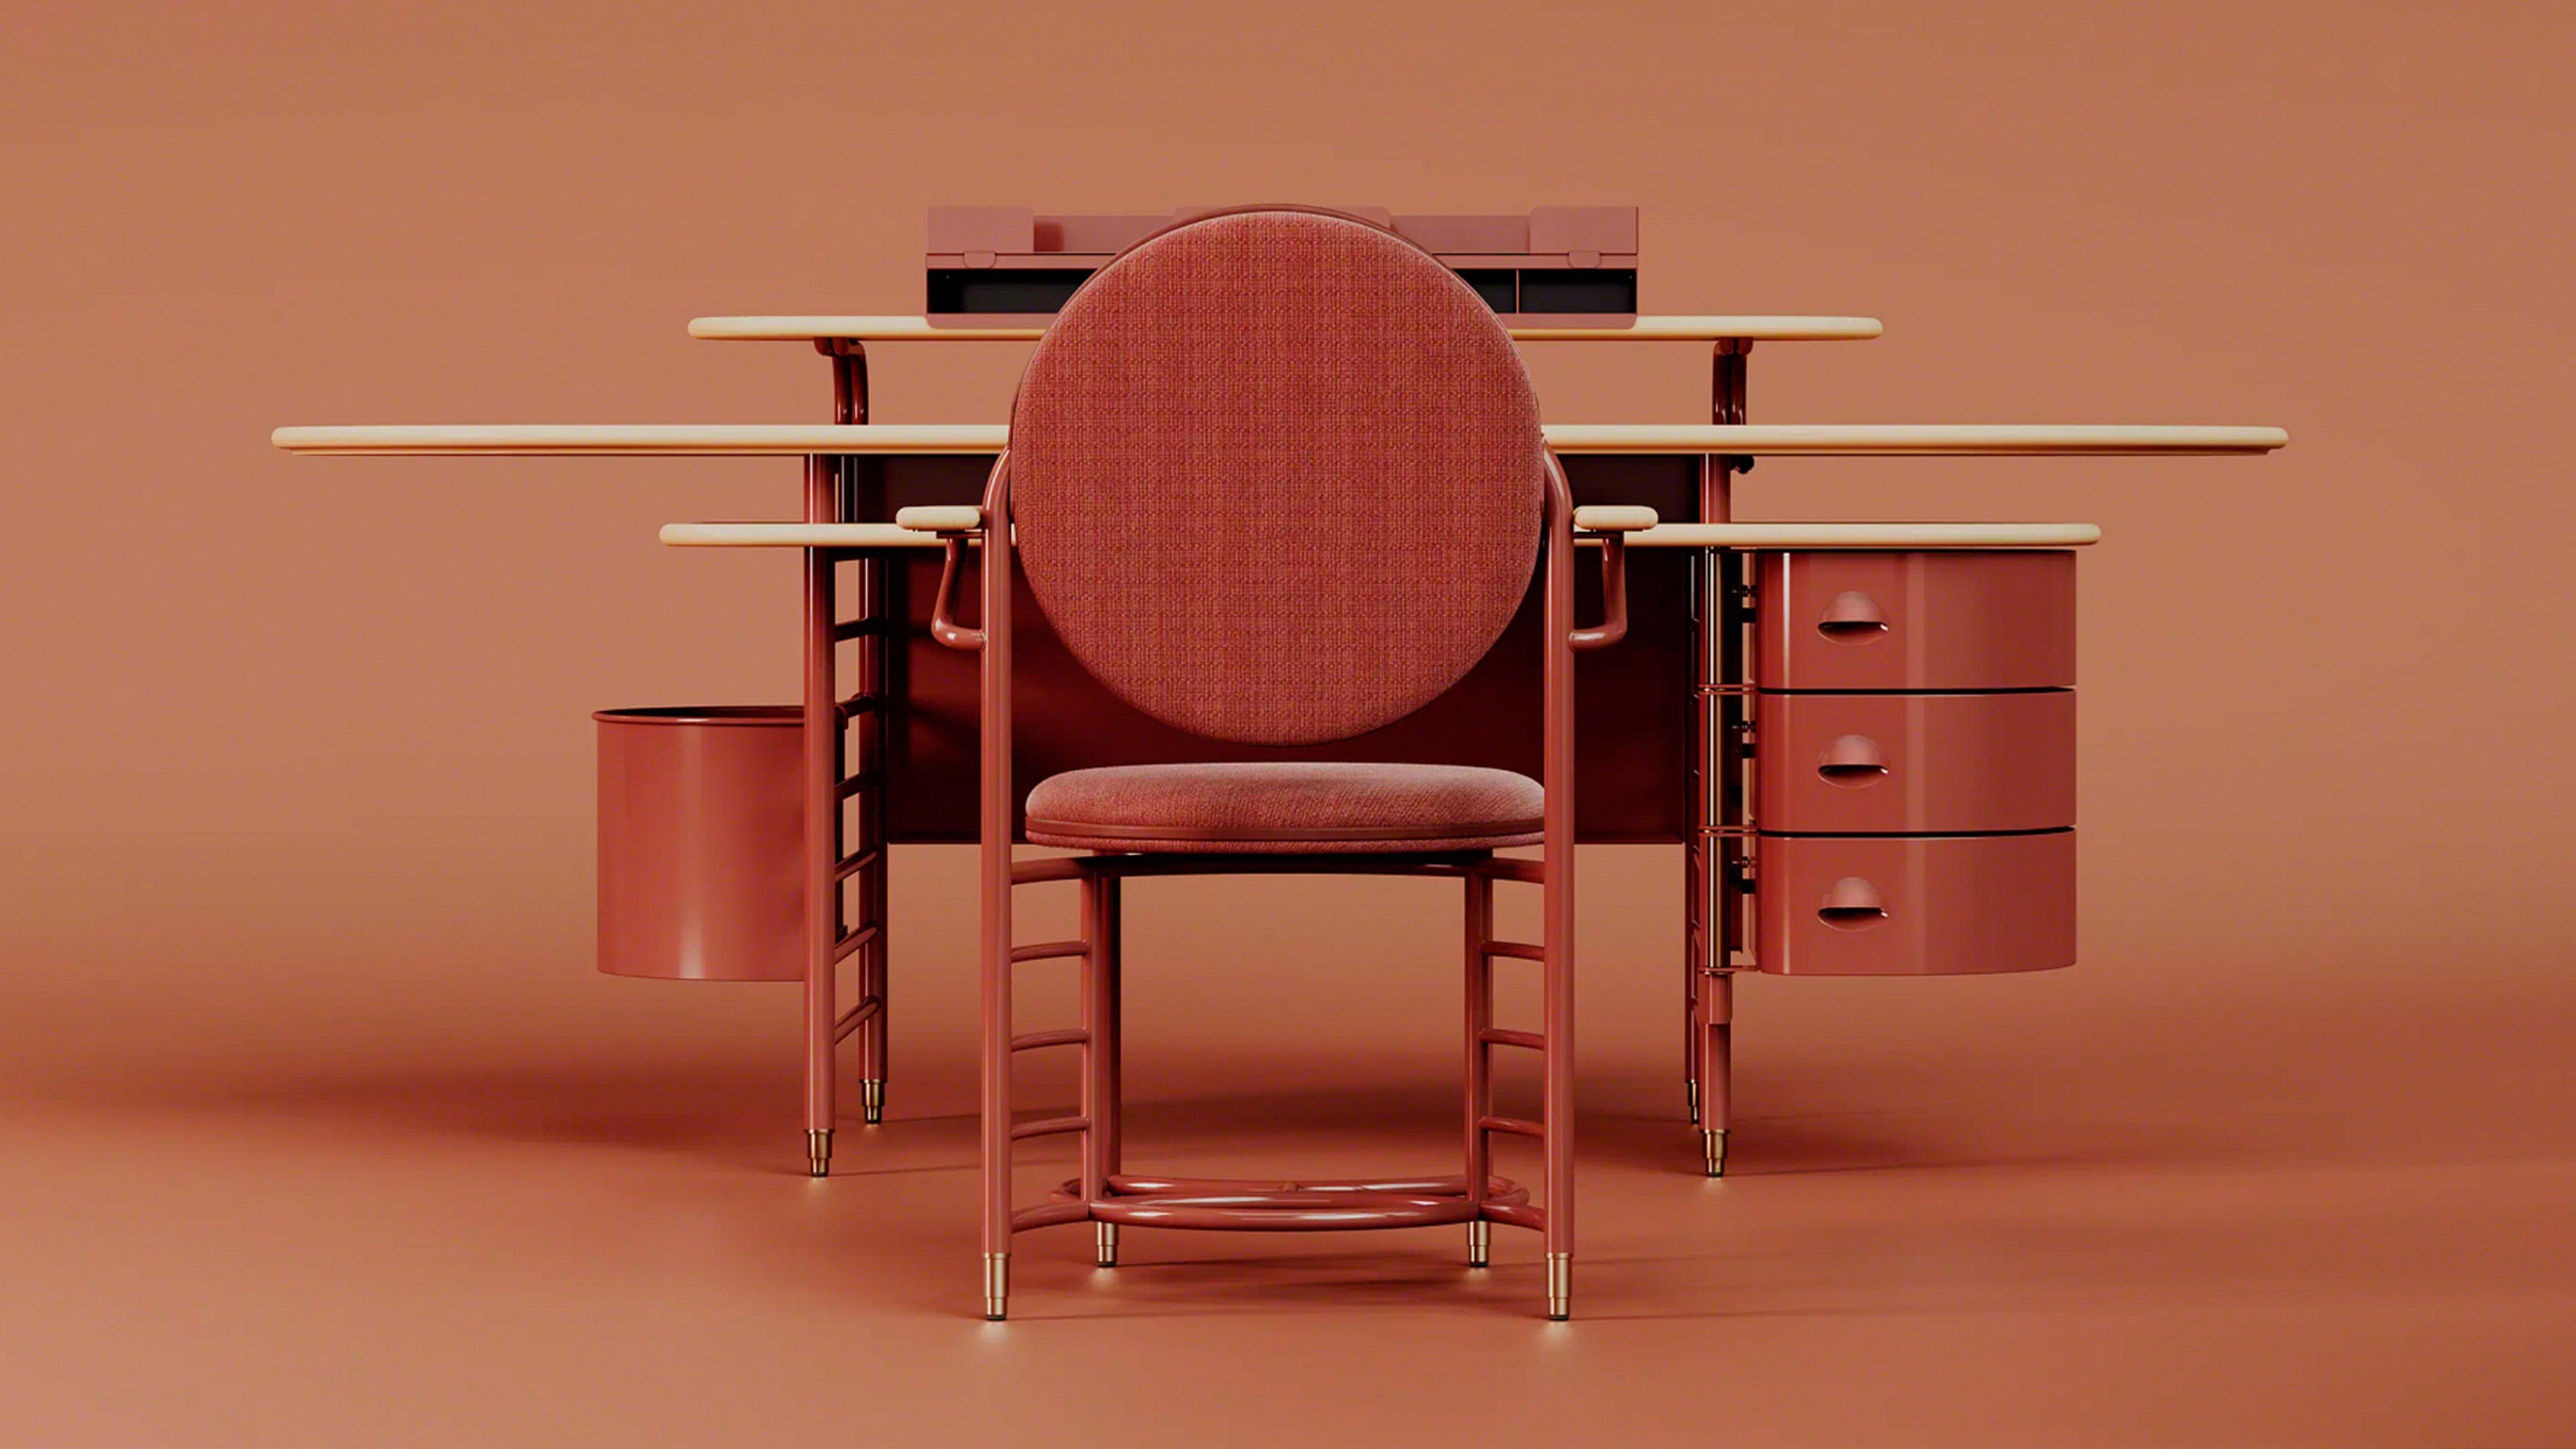 This Frank Lloyd Wright-inspired desk could be yours for $9,750